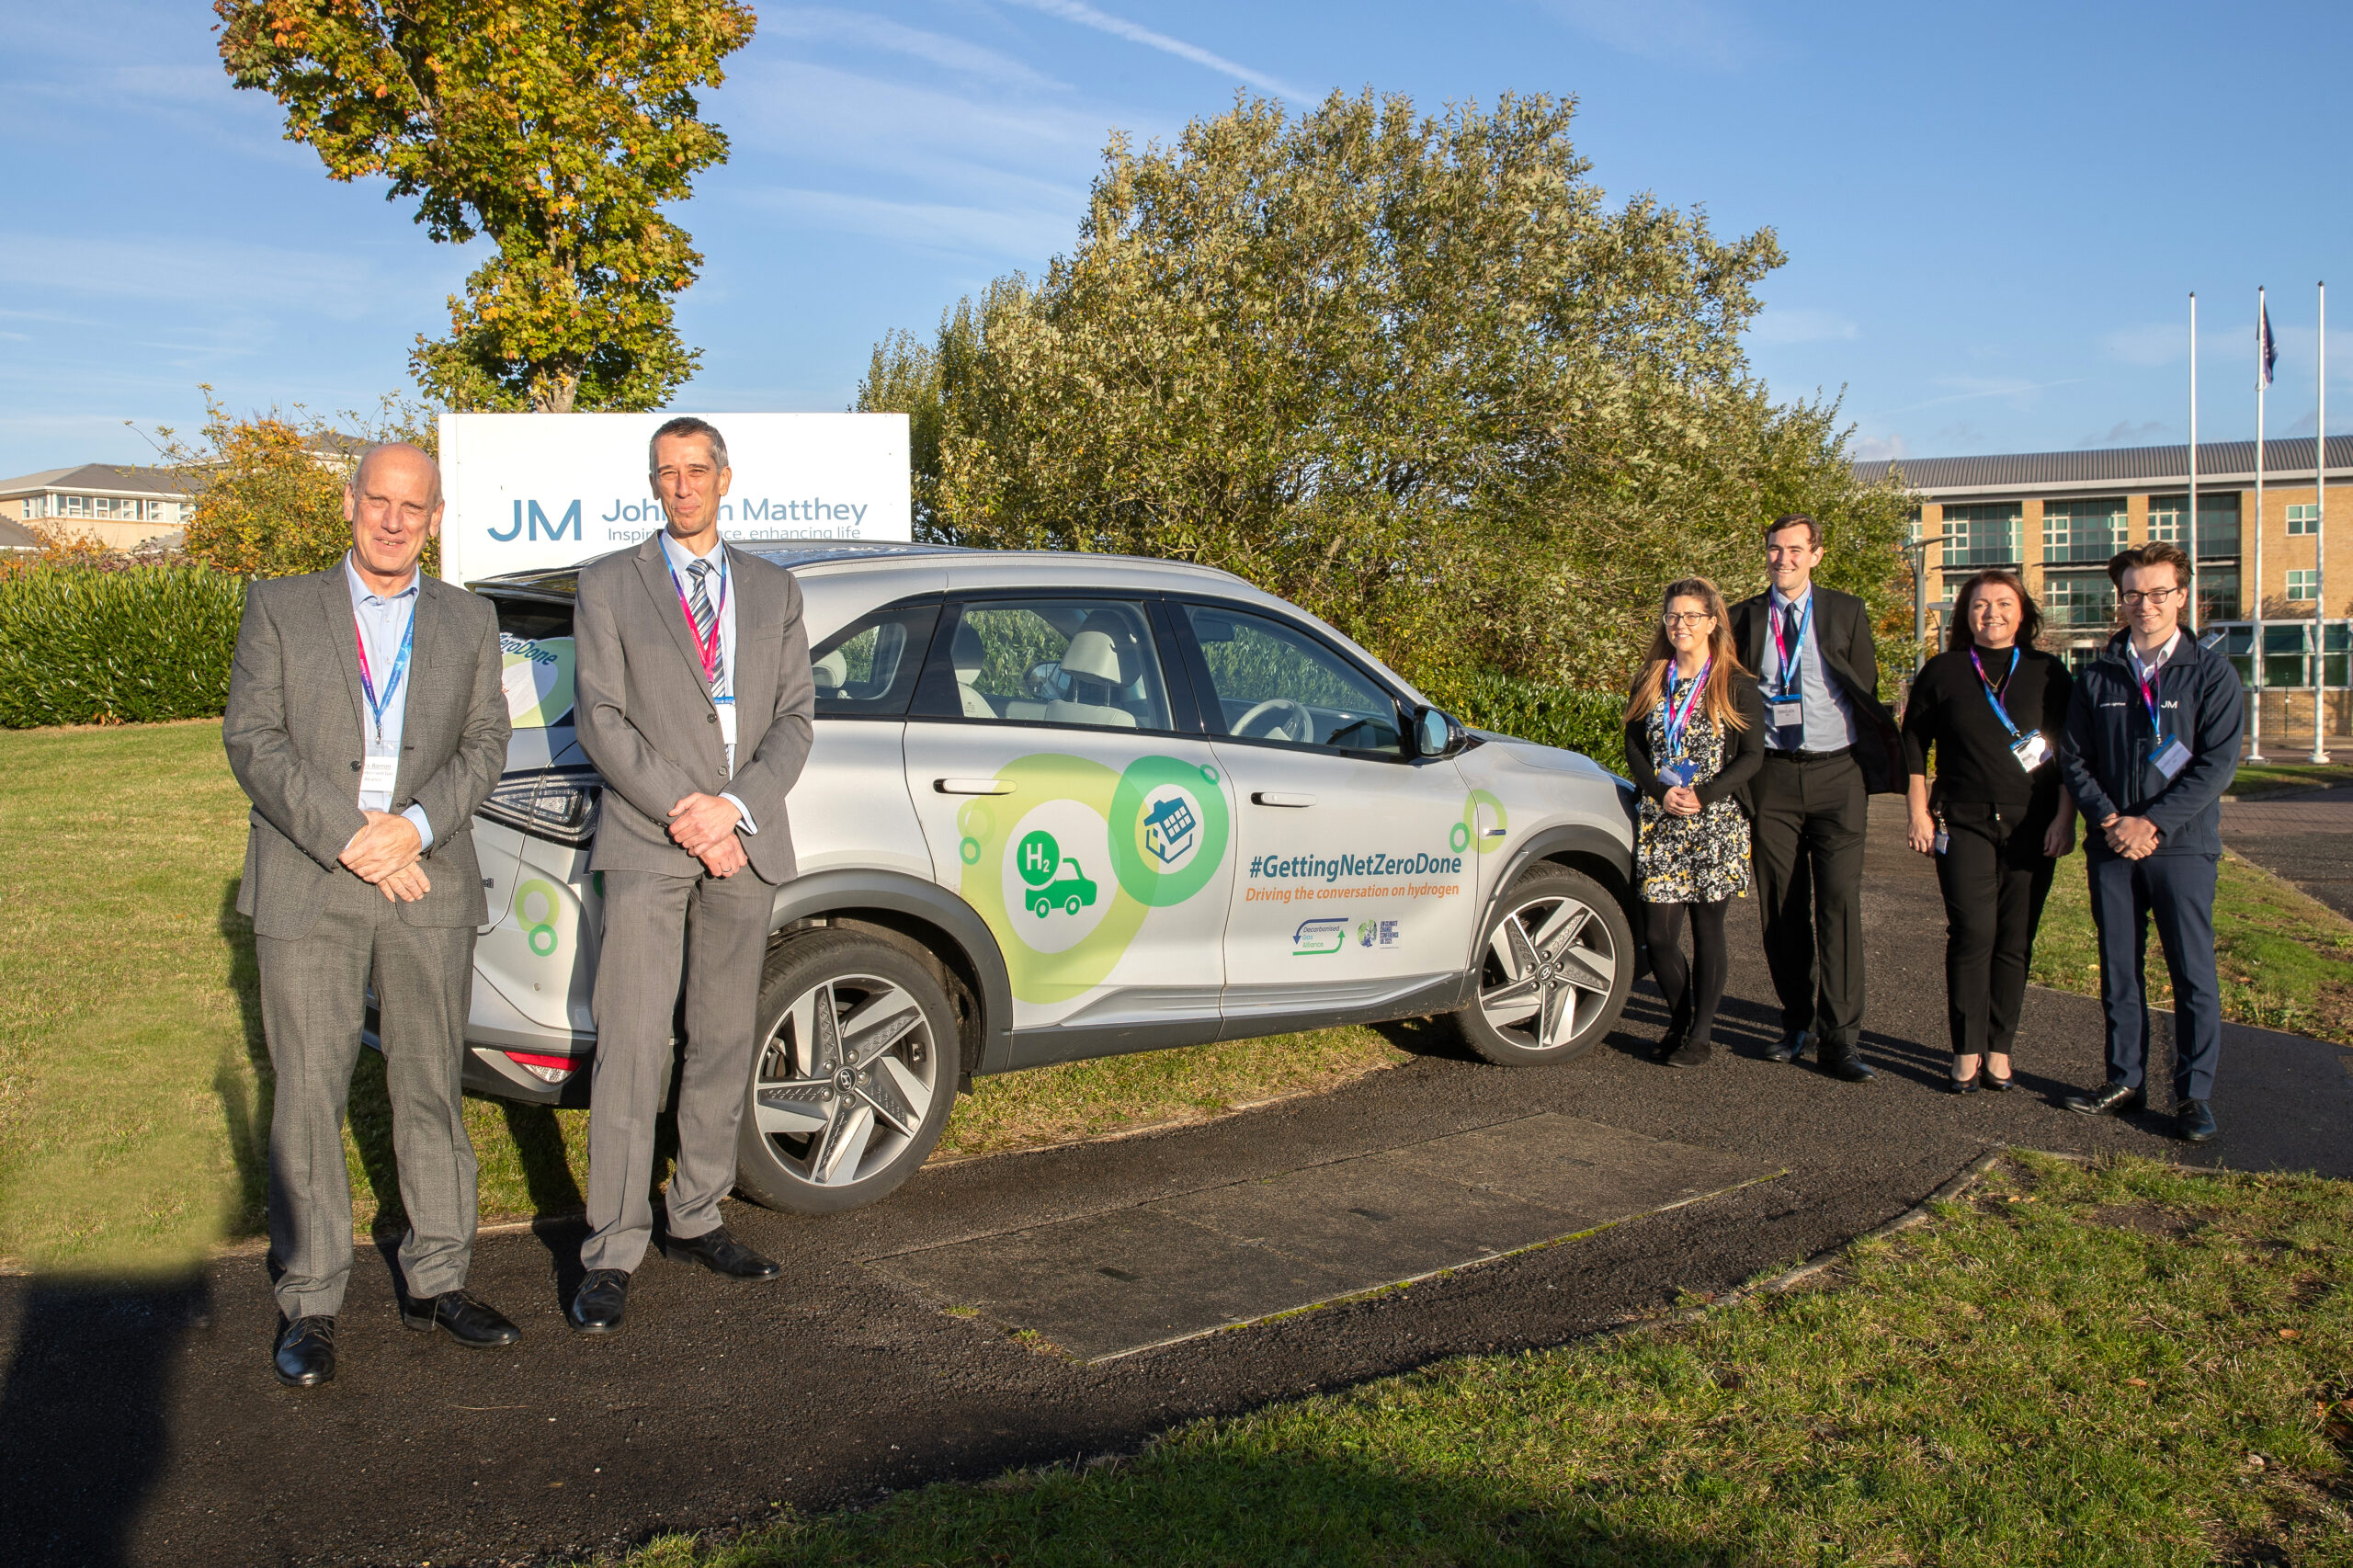 COP26 hydrogen tour visits Johnson Matthey in Stockton to learn how the North East is driving hydrogen cover image